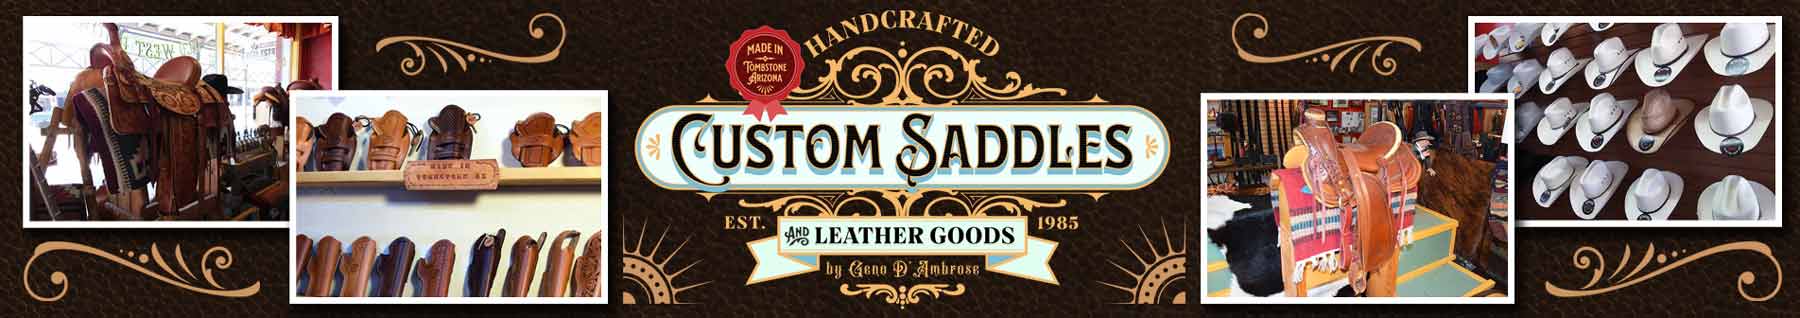 Custom Saddles and Leather in Tombstone AZ